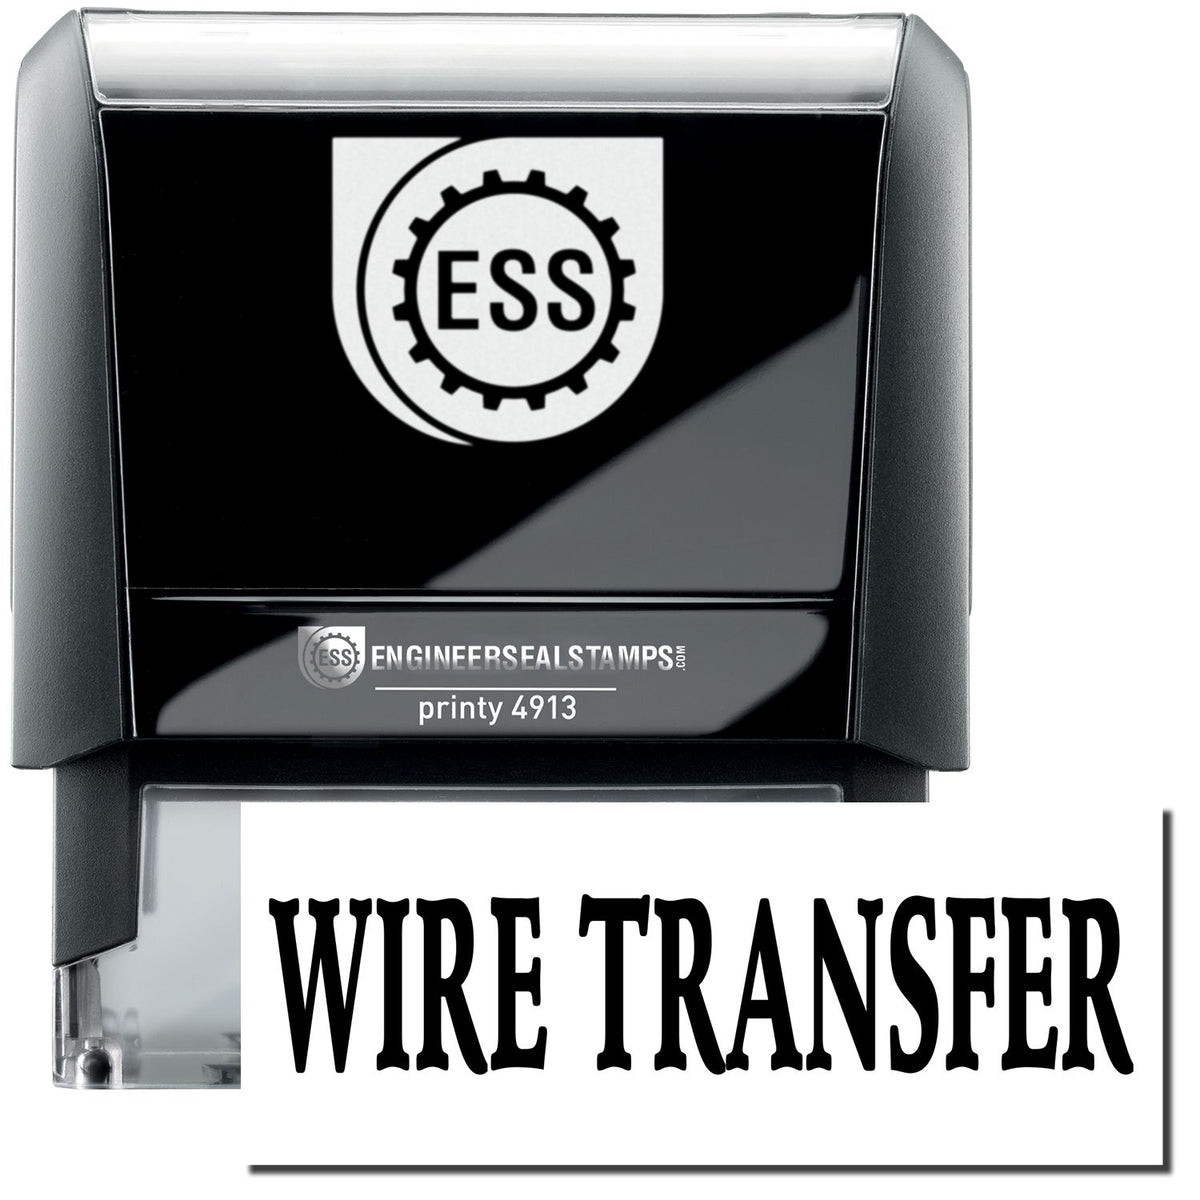 A self-inking stamp with a stamped image showing how the text &quot;WIRE TRANSFER&quot; in a large bold font is displayed by it.